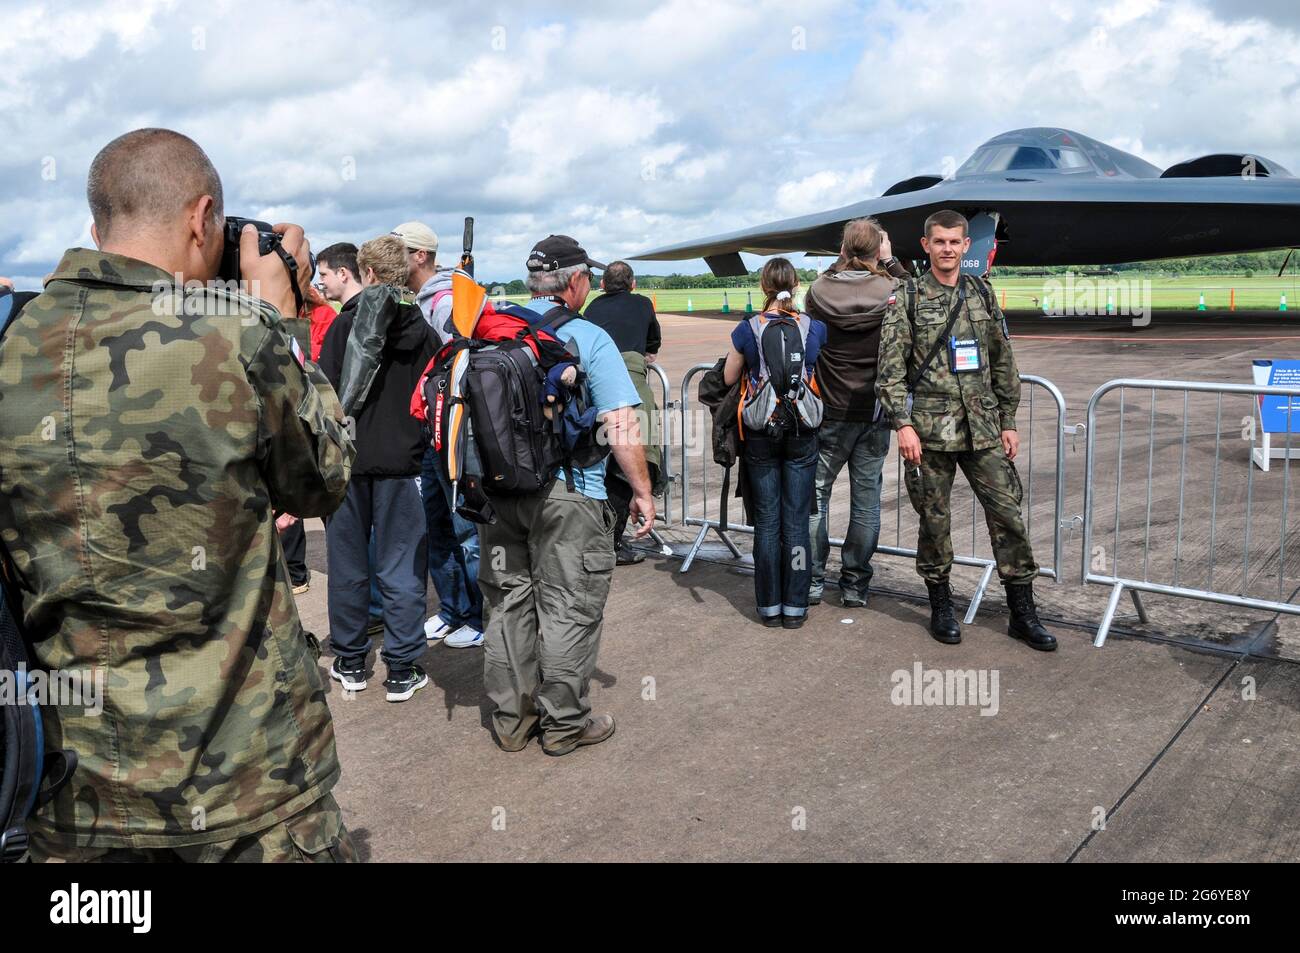 Polish Air Force personnel photographing in front of a Northrop Grumman B-2 Spirit stealth bomber at RIAT airshow. Polish military crew Stock Photo